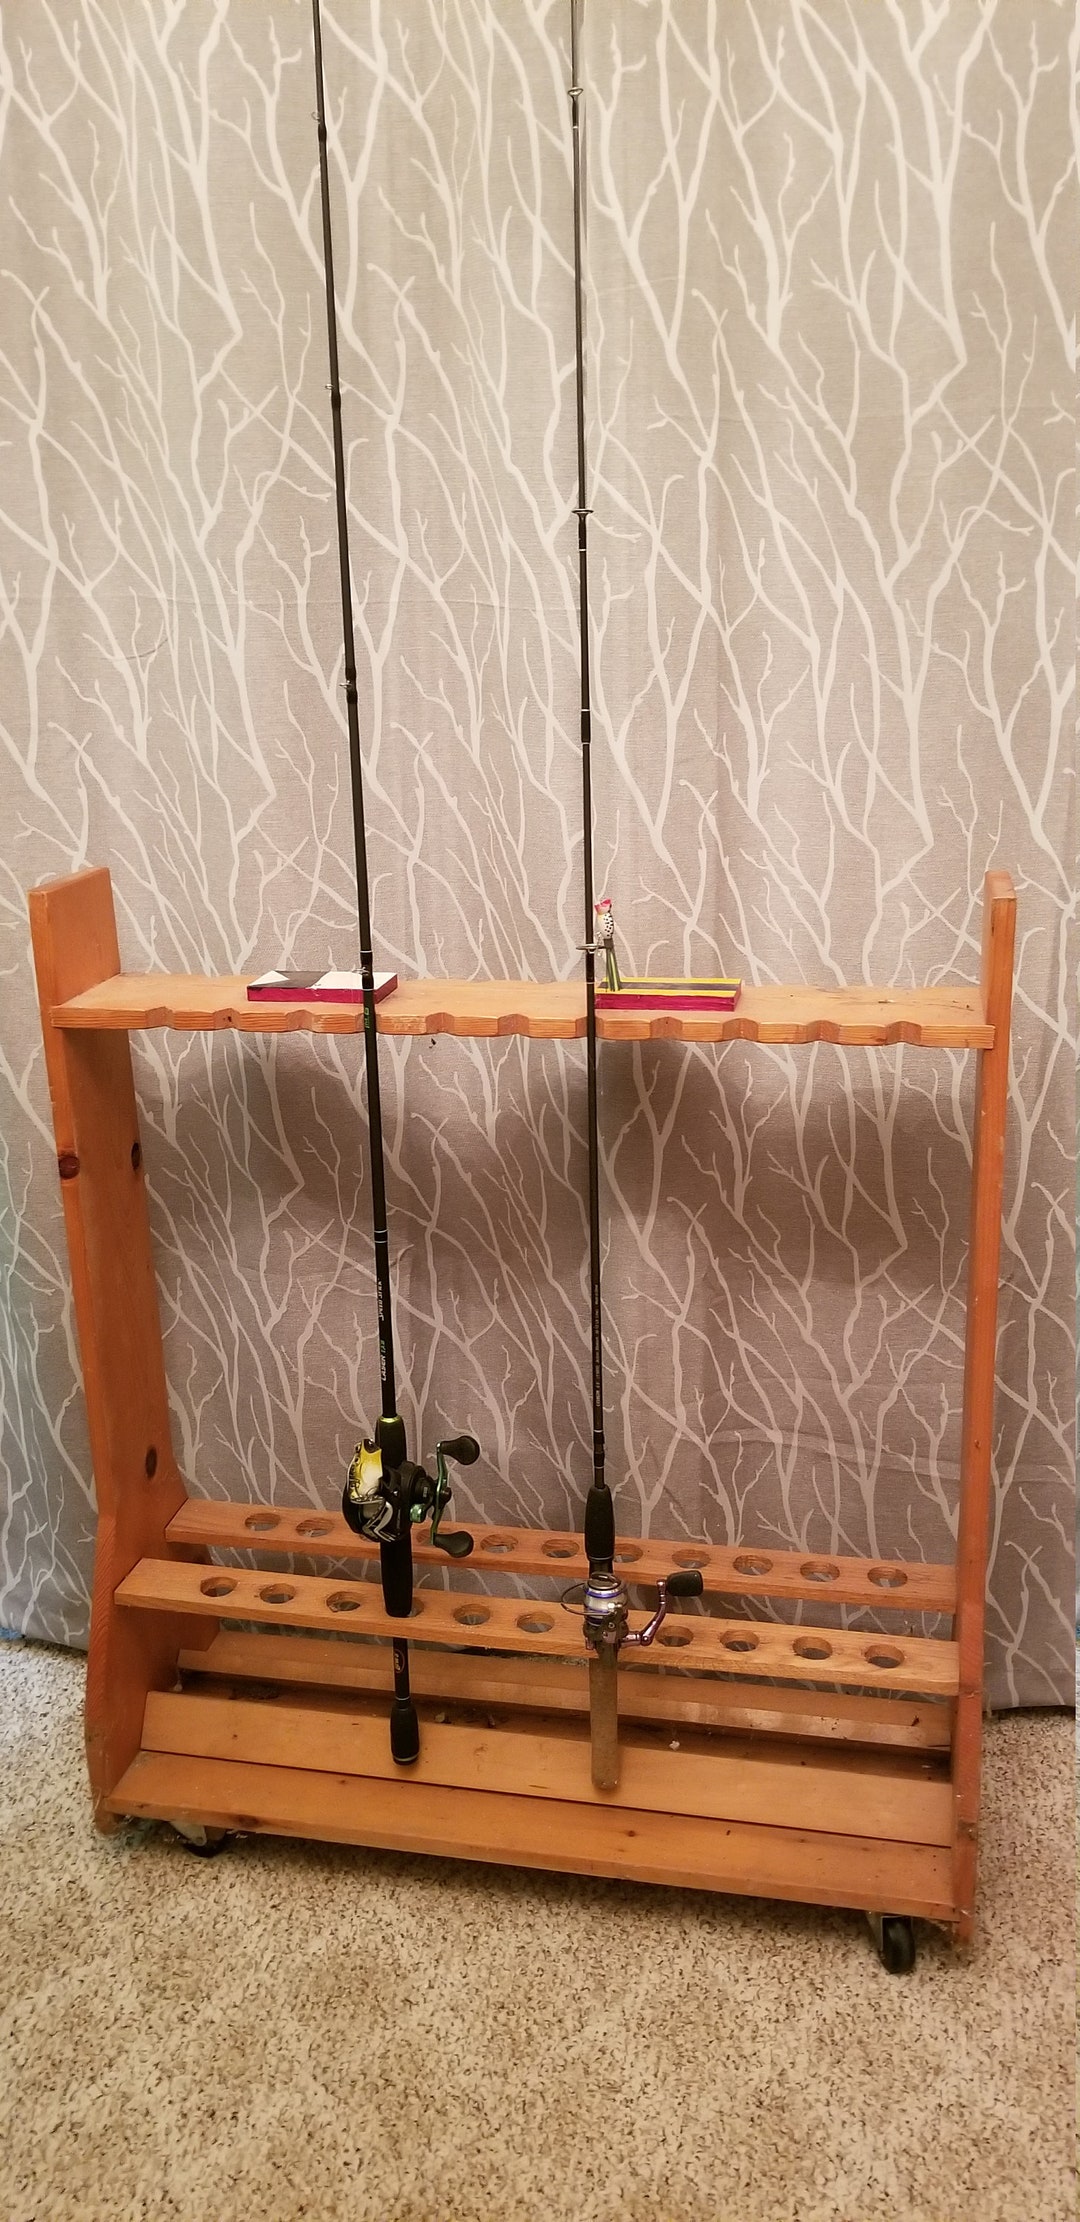 Fishing pole holder woodworking plans - Reel in Success DIY Fishing Rod Rack  Plans Showcase Your Gear and Boost Woodworking Skills. Dive Into Your  Fishing Haven Today 